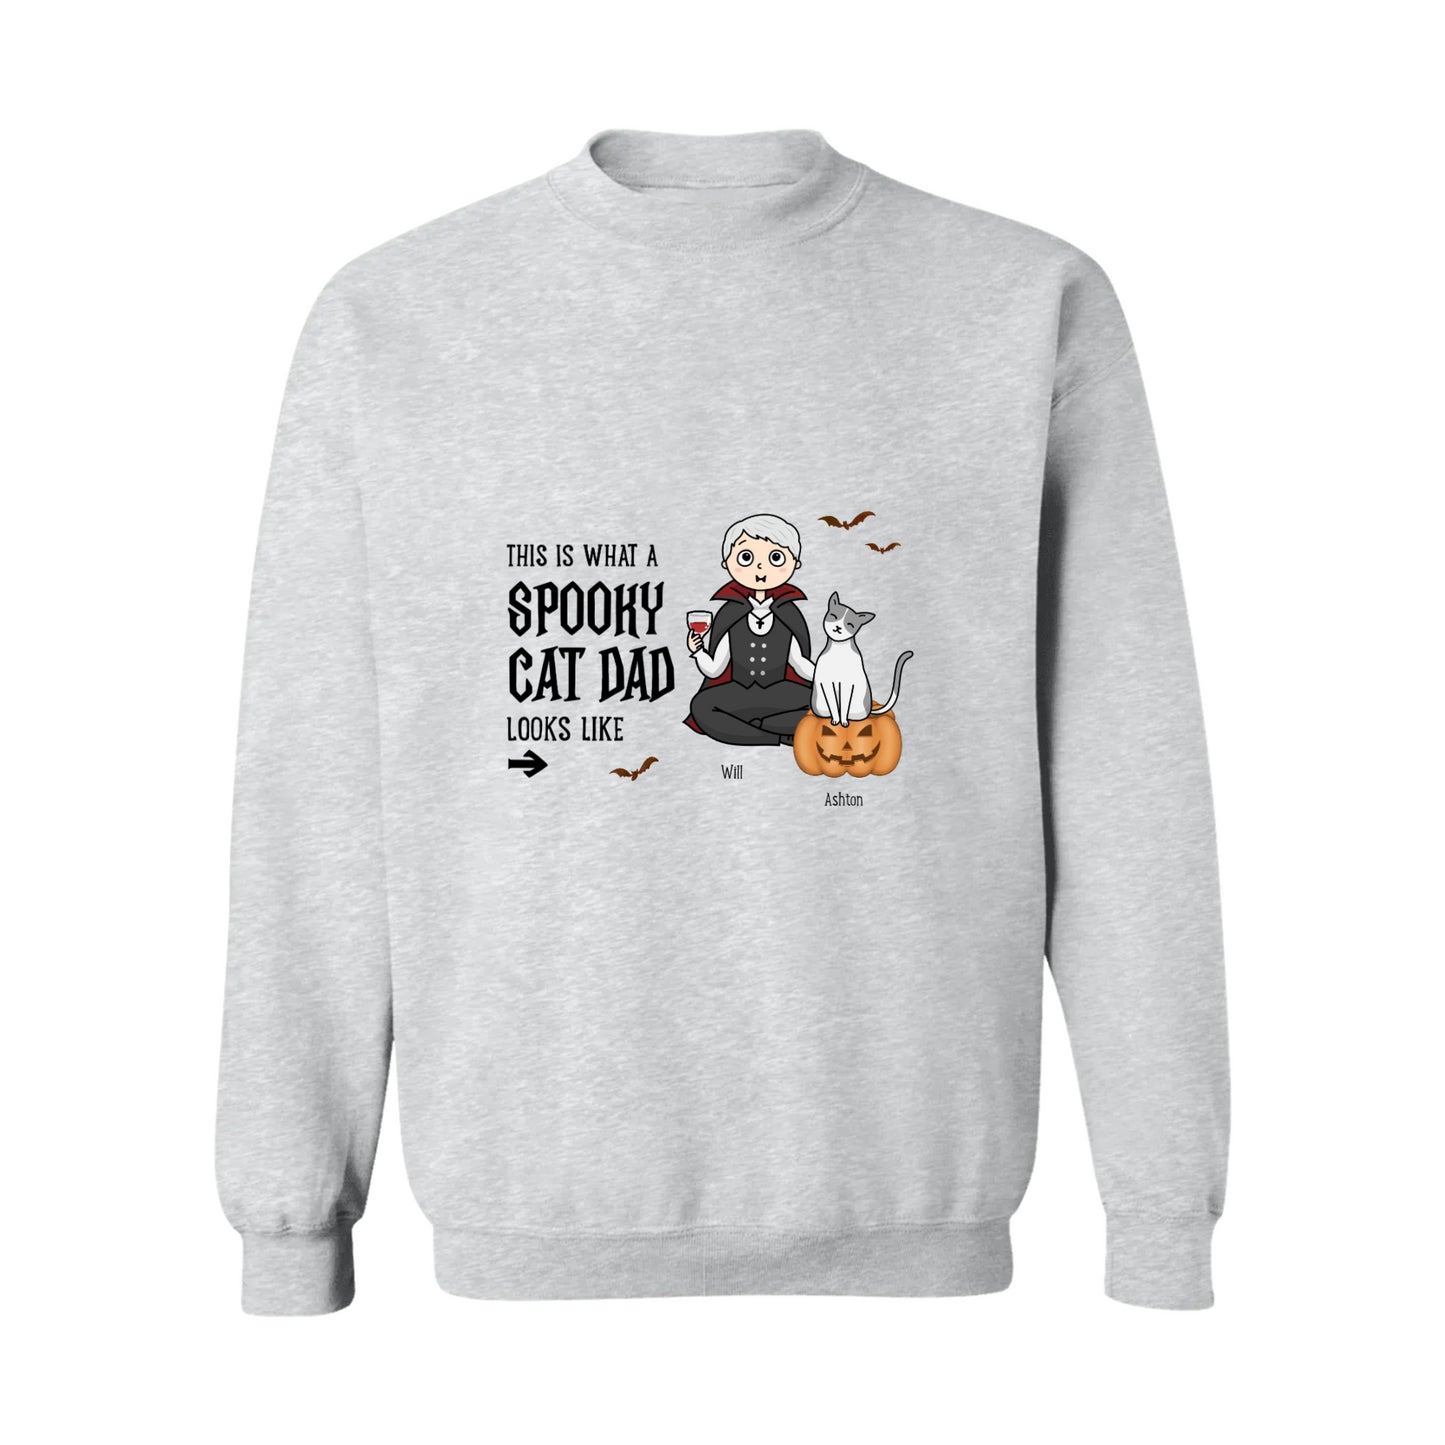 This is what a Spooky Cat Dad Looks Like Crewneck Pullover Sweatshirt